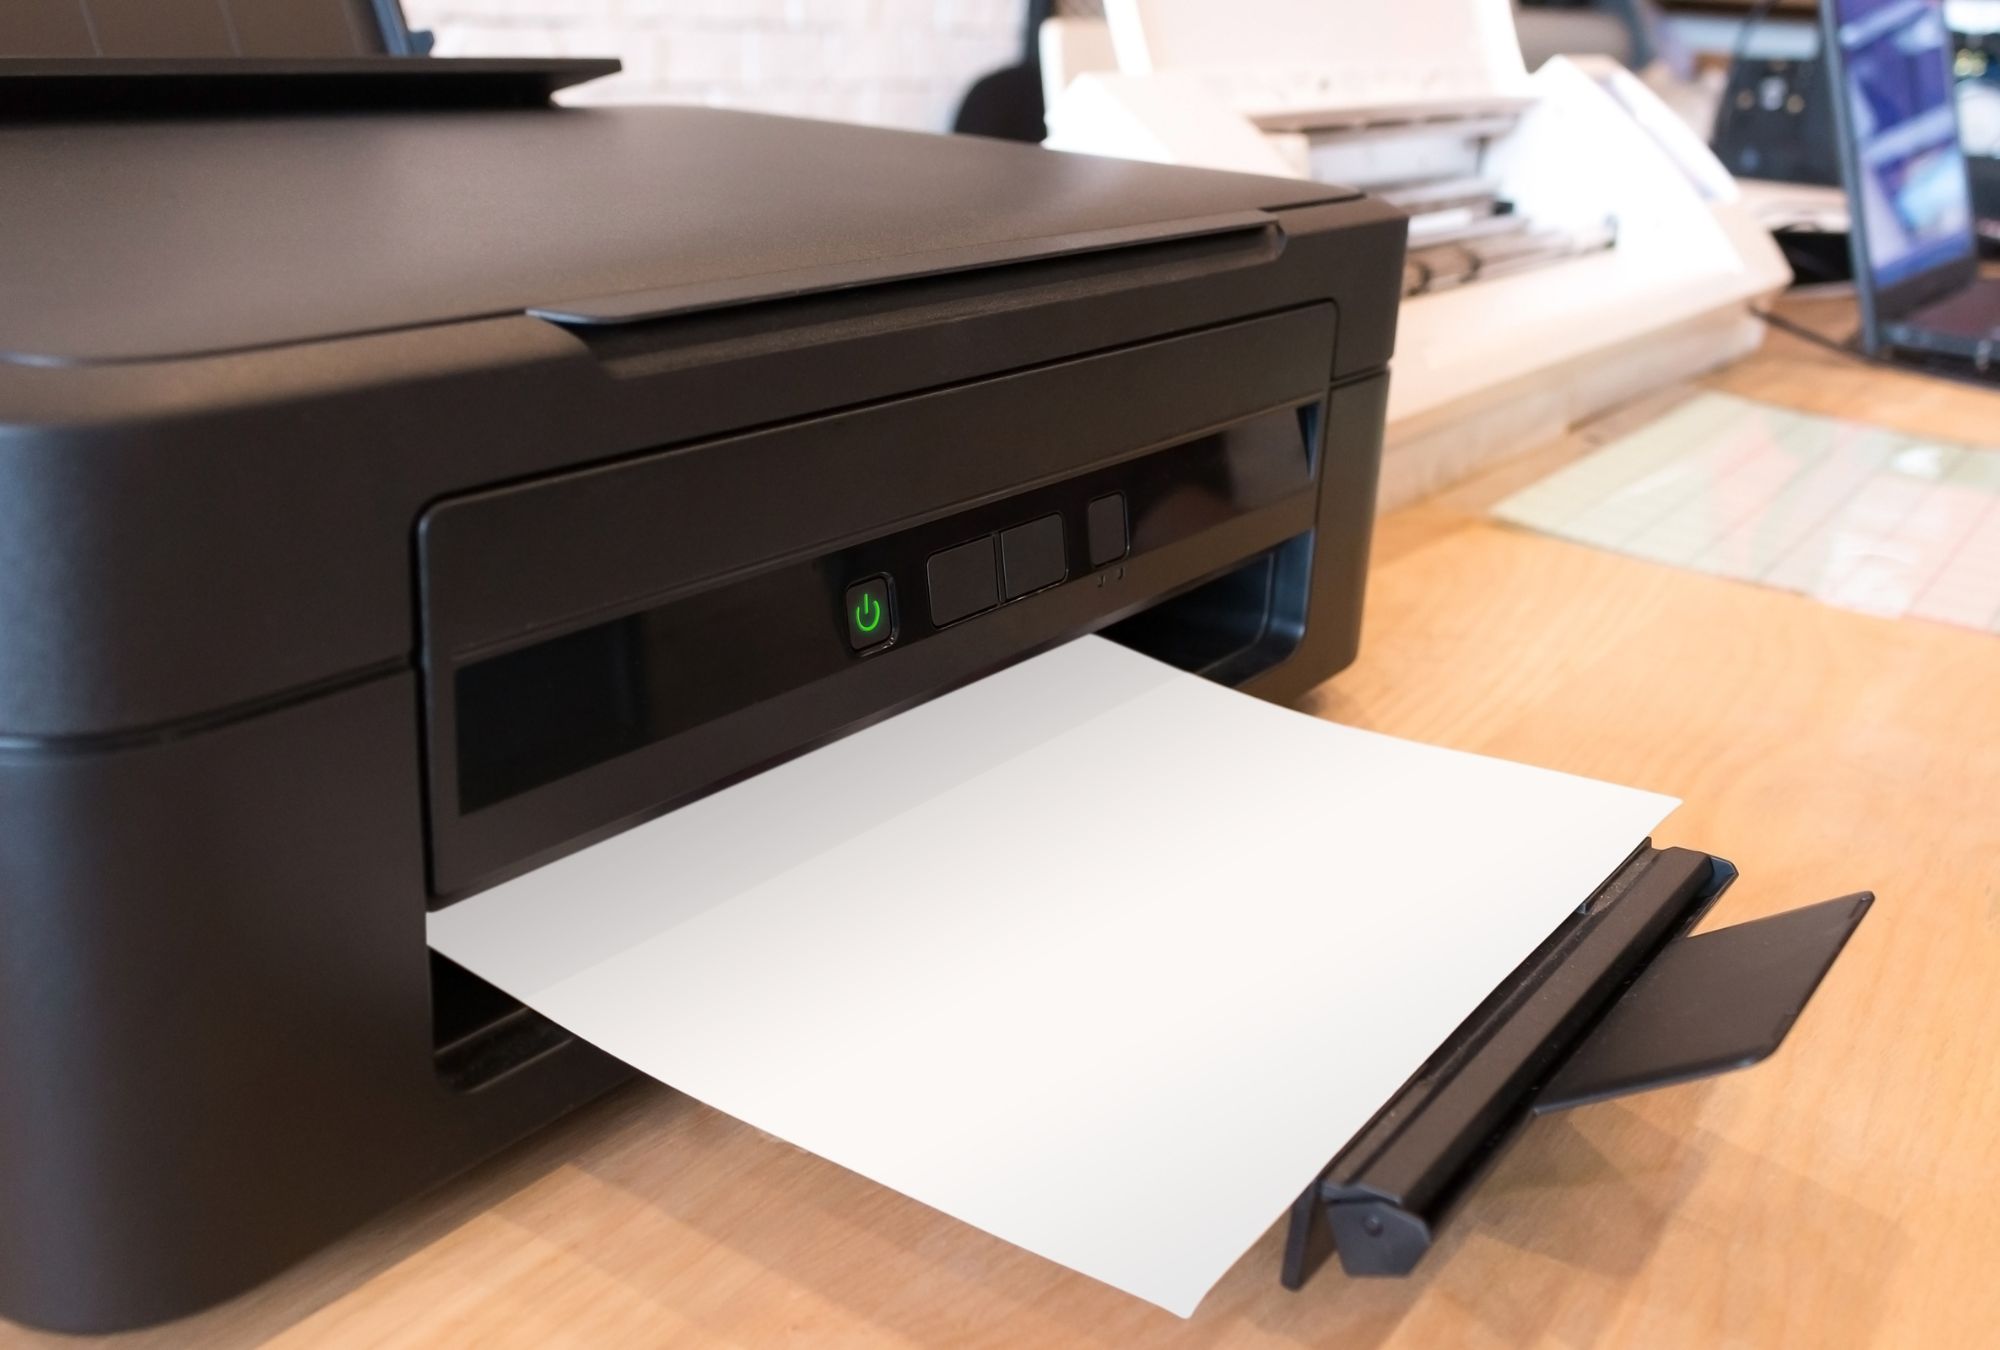 How do laser printers work?